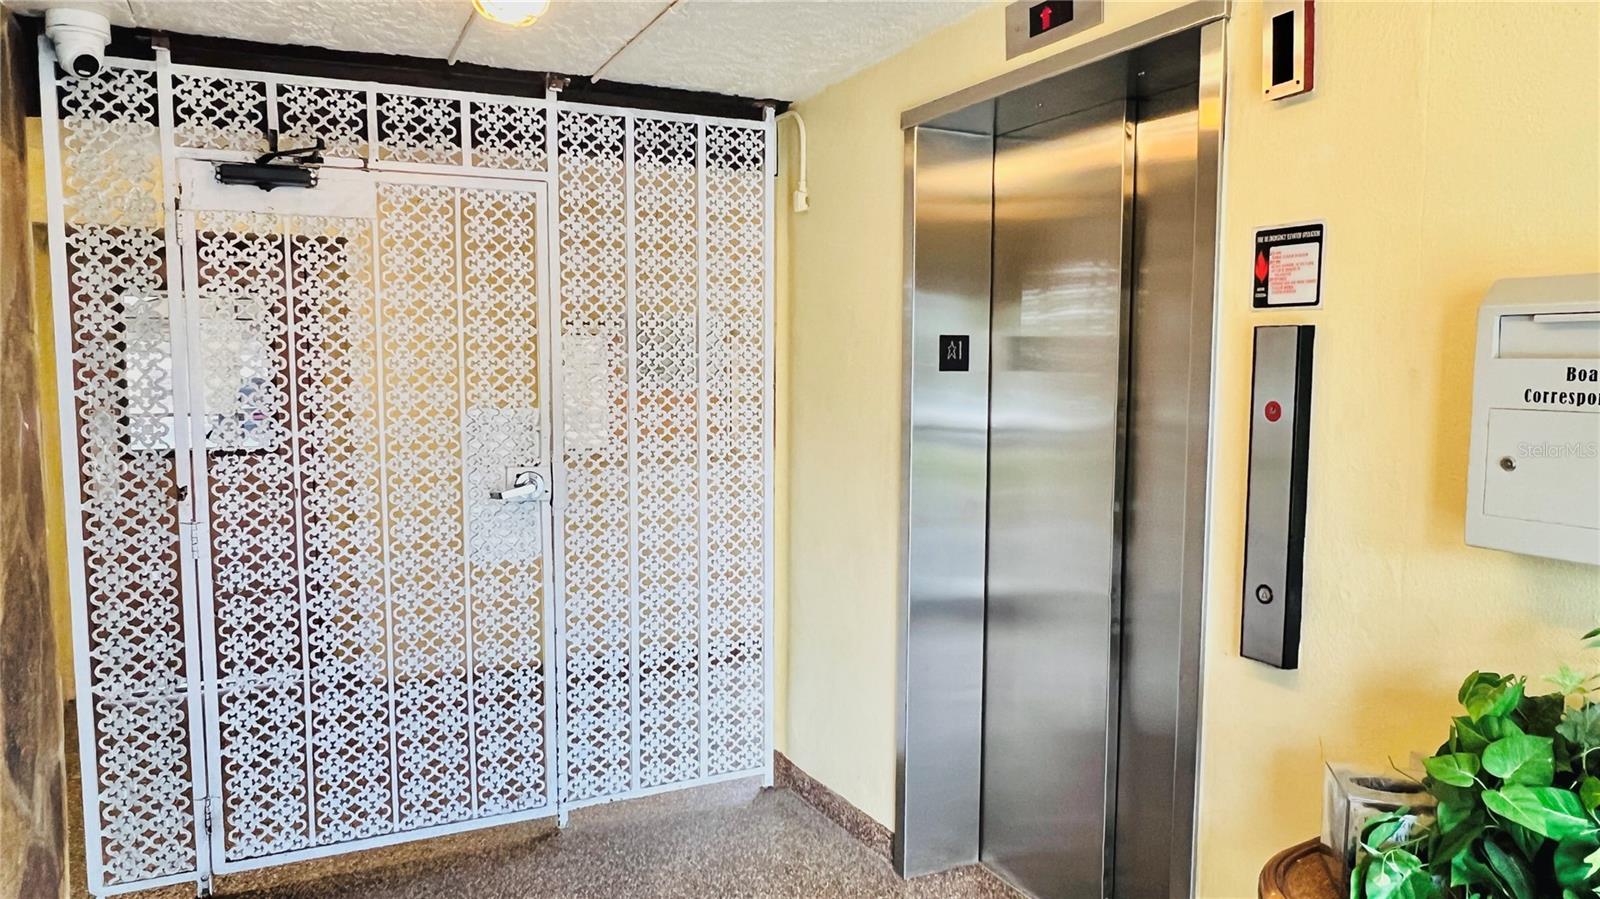 Gated entry to elevator